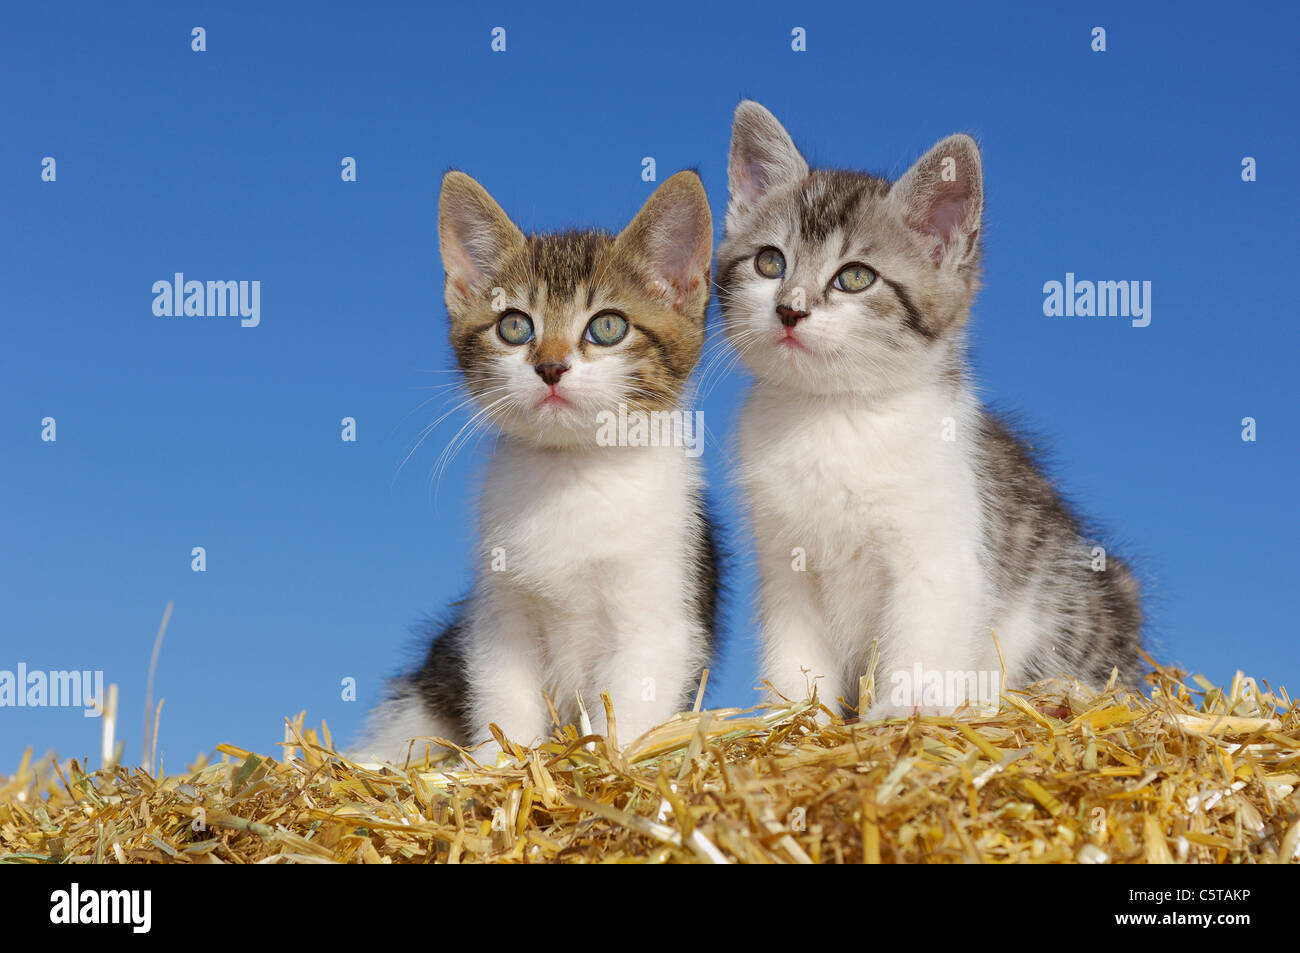 Germany, Bavaria, Two kittens in straw Stock Photo